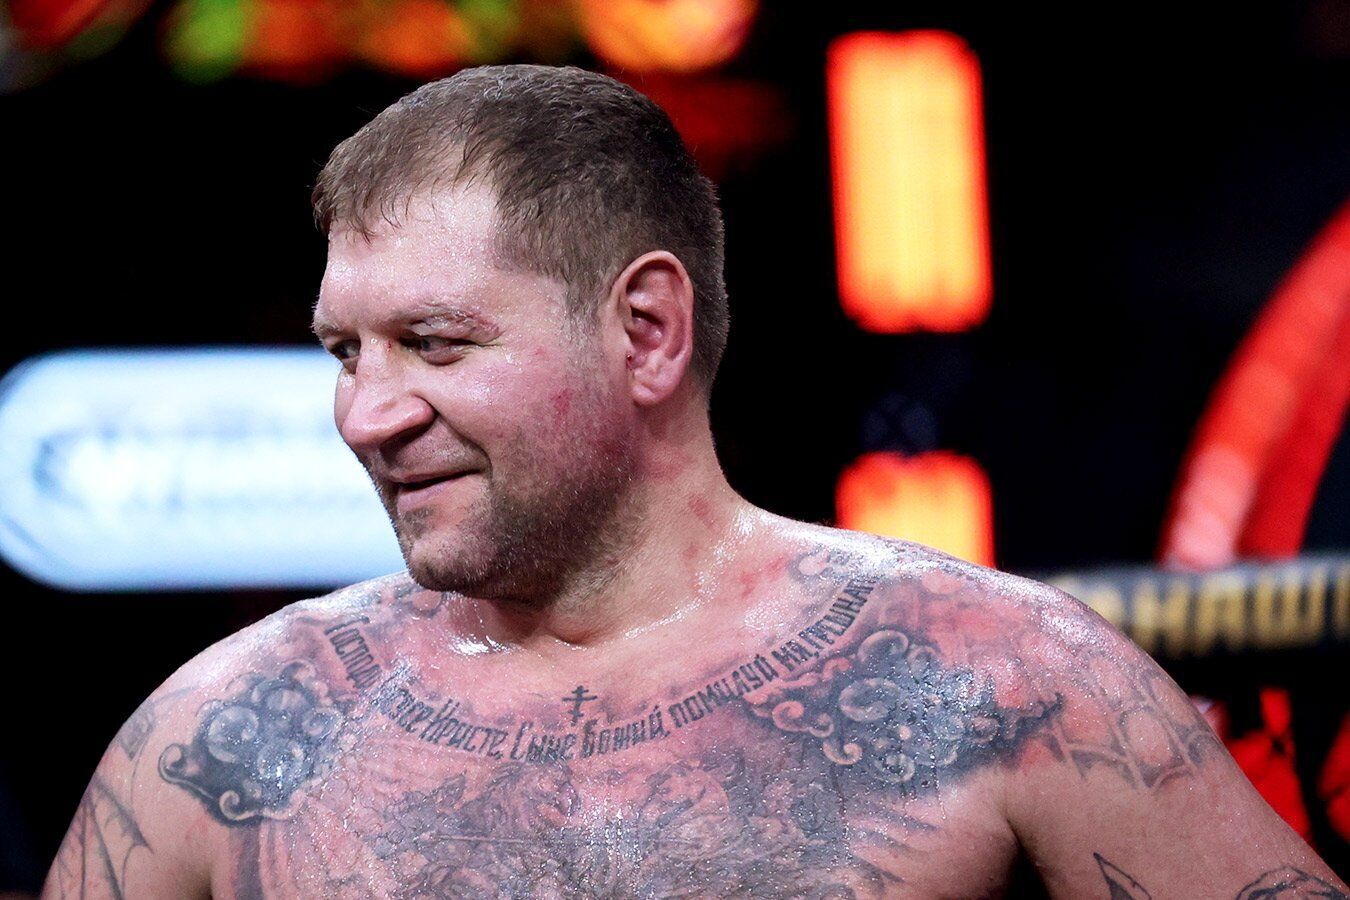 ''Forbade me to perform'': Russian Emelianenko explains why he does not fight in the UFC